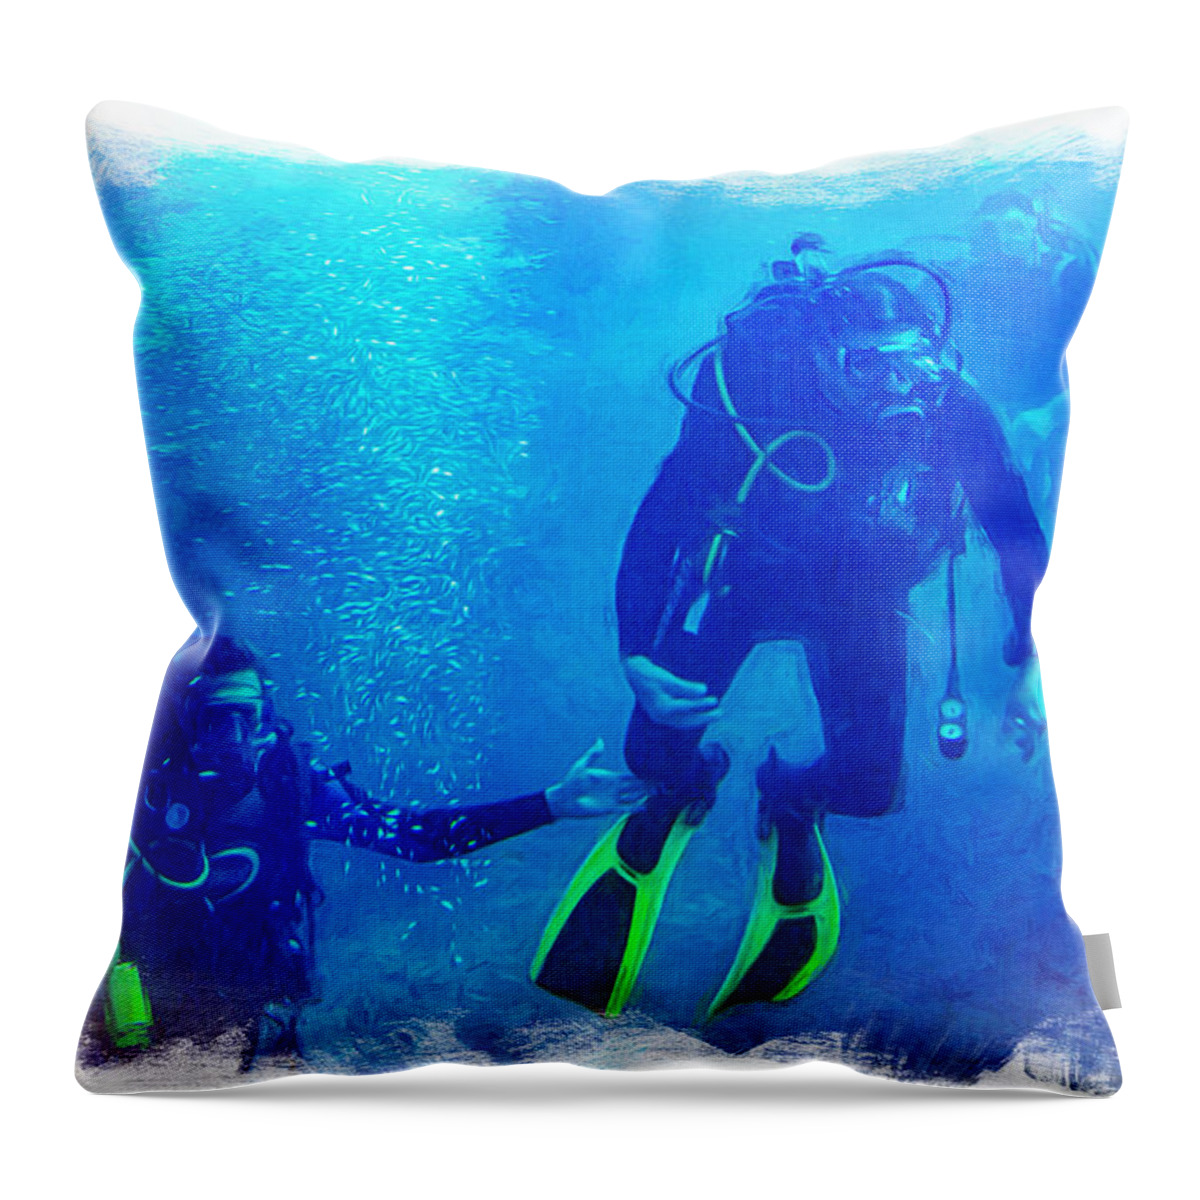 Caribbean Sea Throw Pillow featuring the photograph Caribbean Sea Divers Cozumel, Mexico by Tatiana Travelways